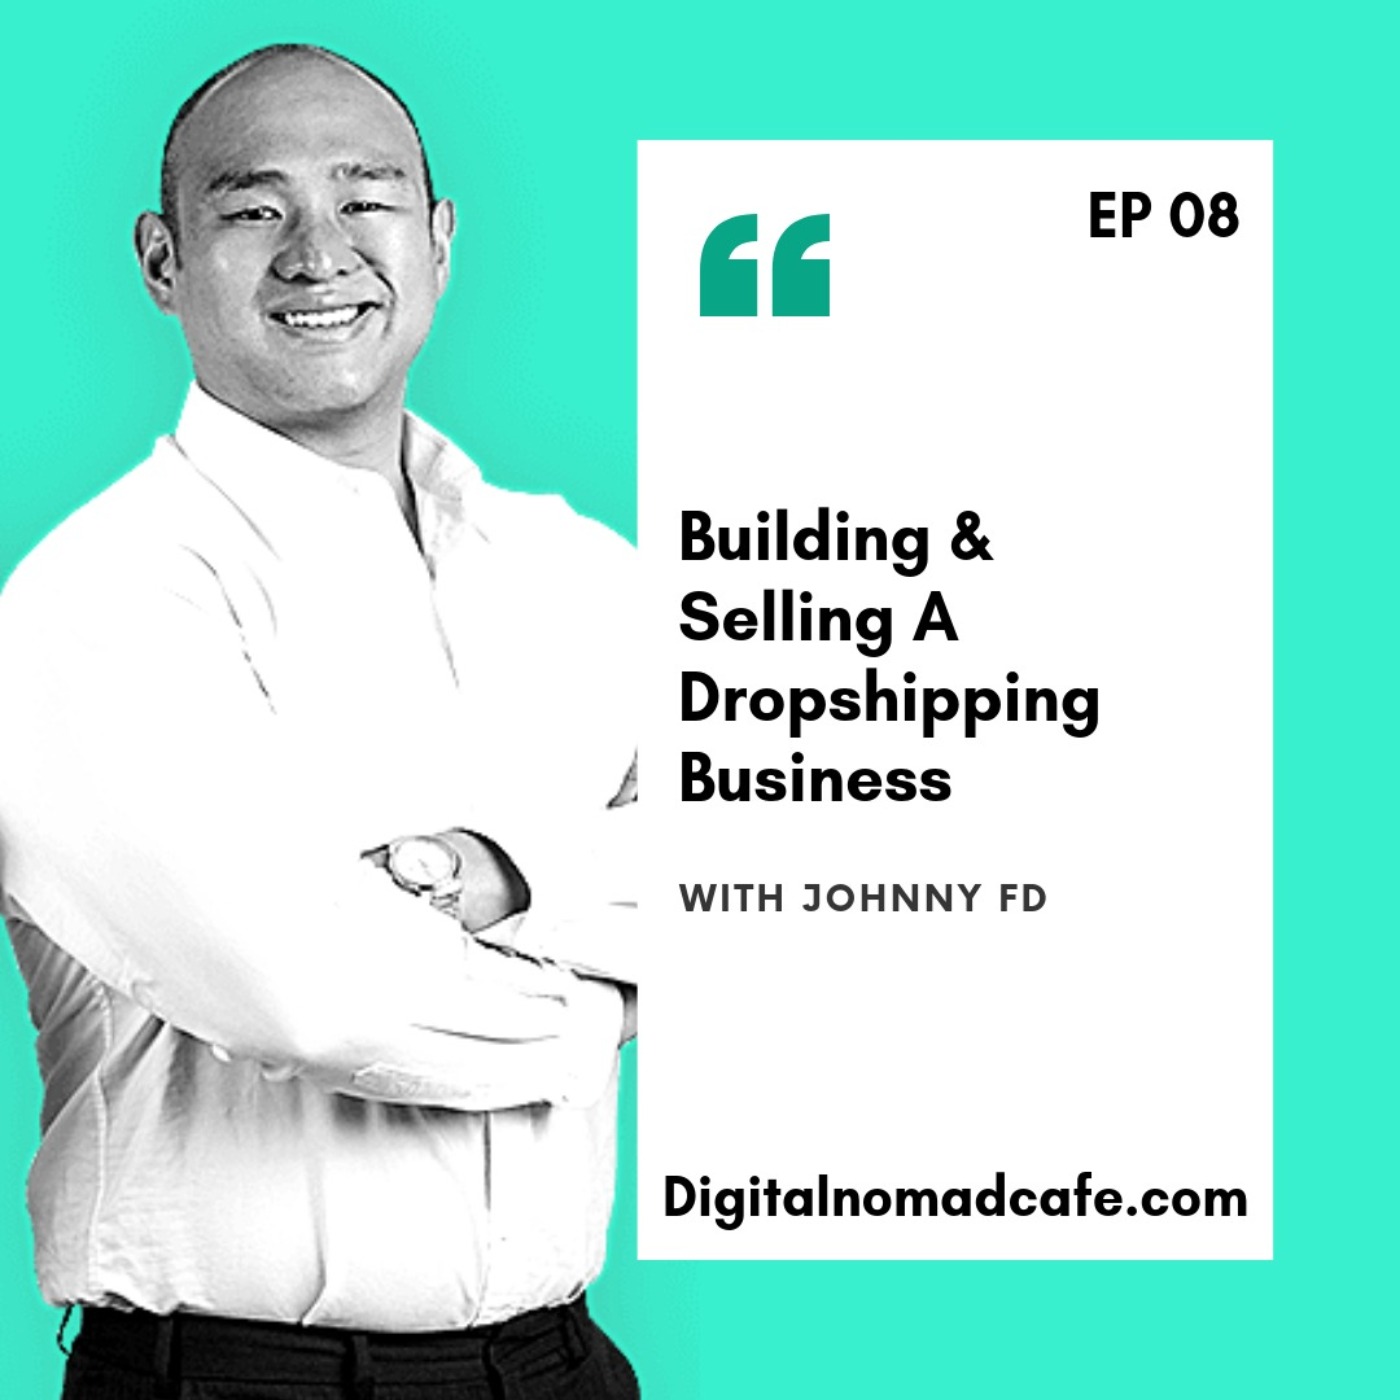 EP08: Building & Selling A Dropshipping Business with JohnnyFD